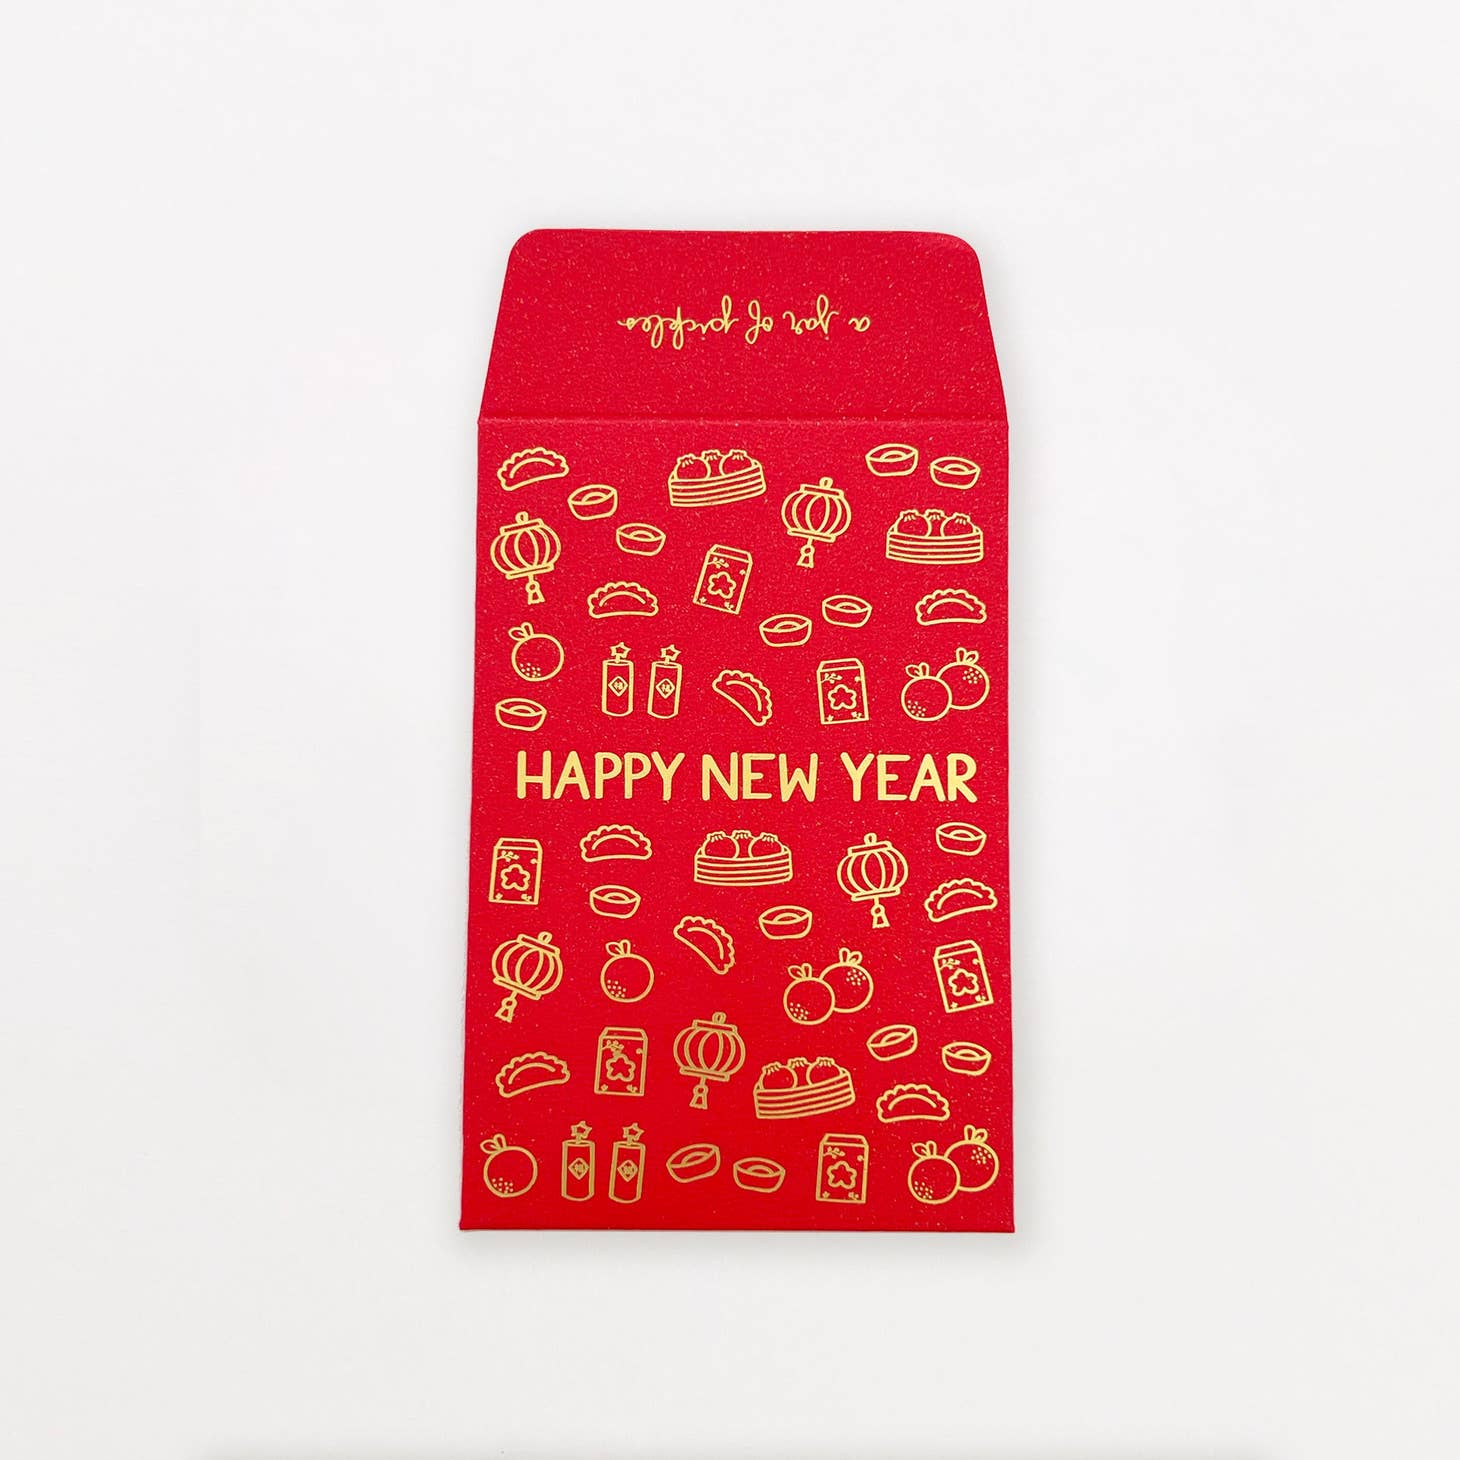 Red background with gold foil images of Chinese New Year symbols including food and latterns. Gold foil text says, “Happy New Year”.      